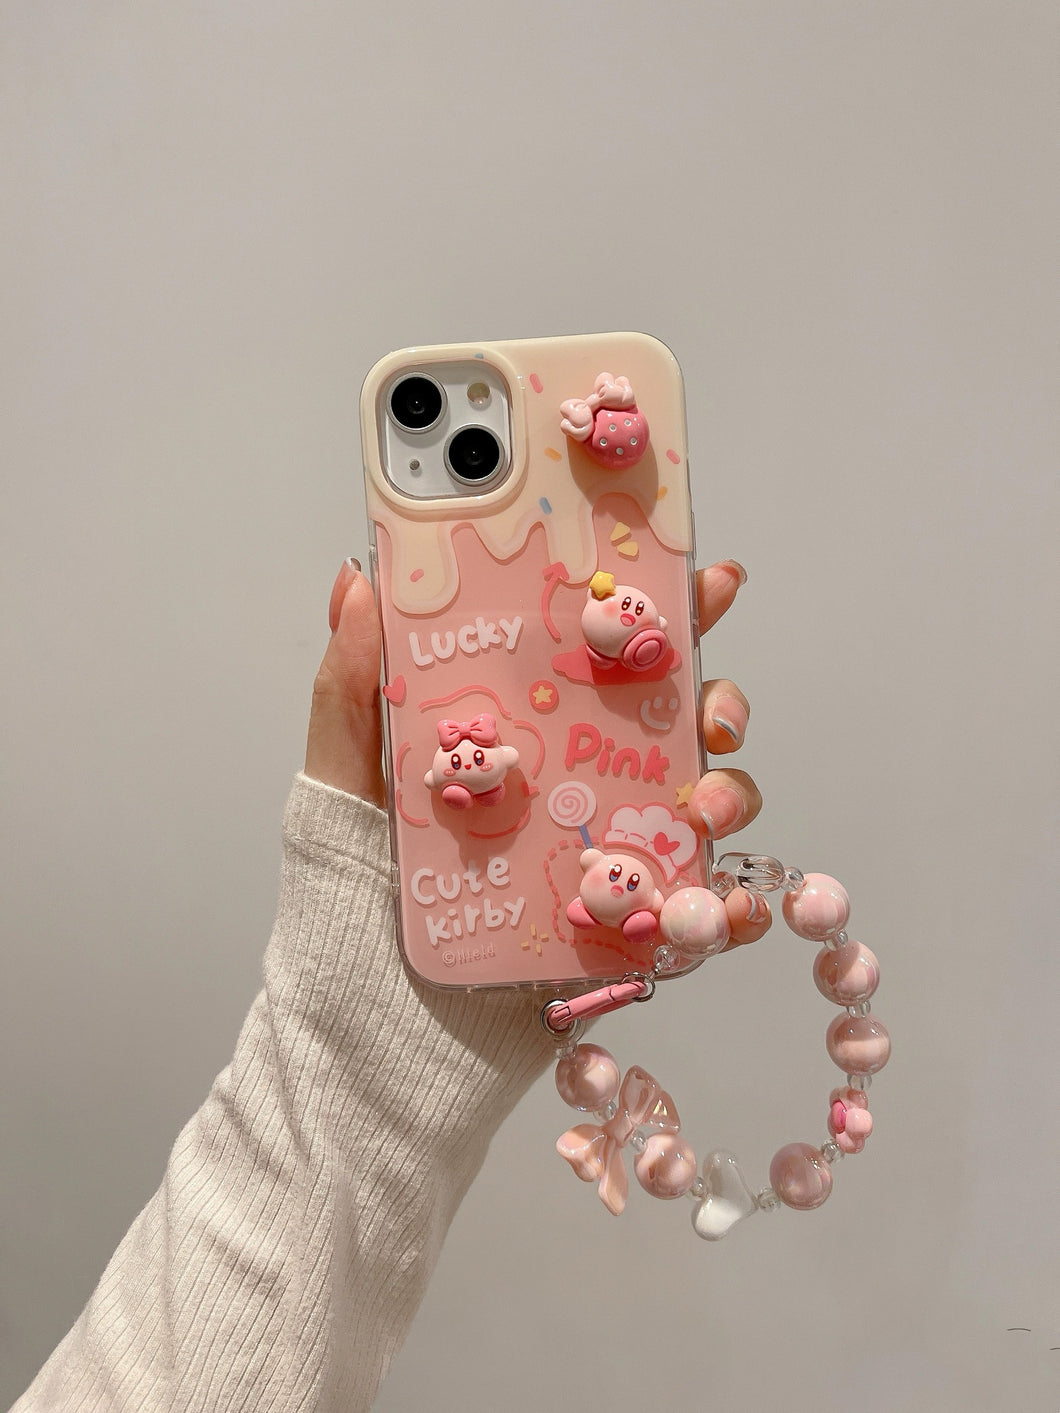 3D Cutie Pink Kirby iPhone Case